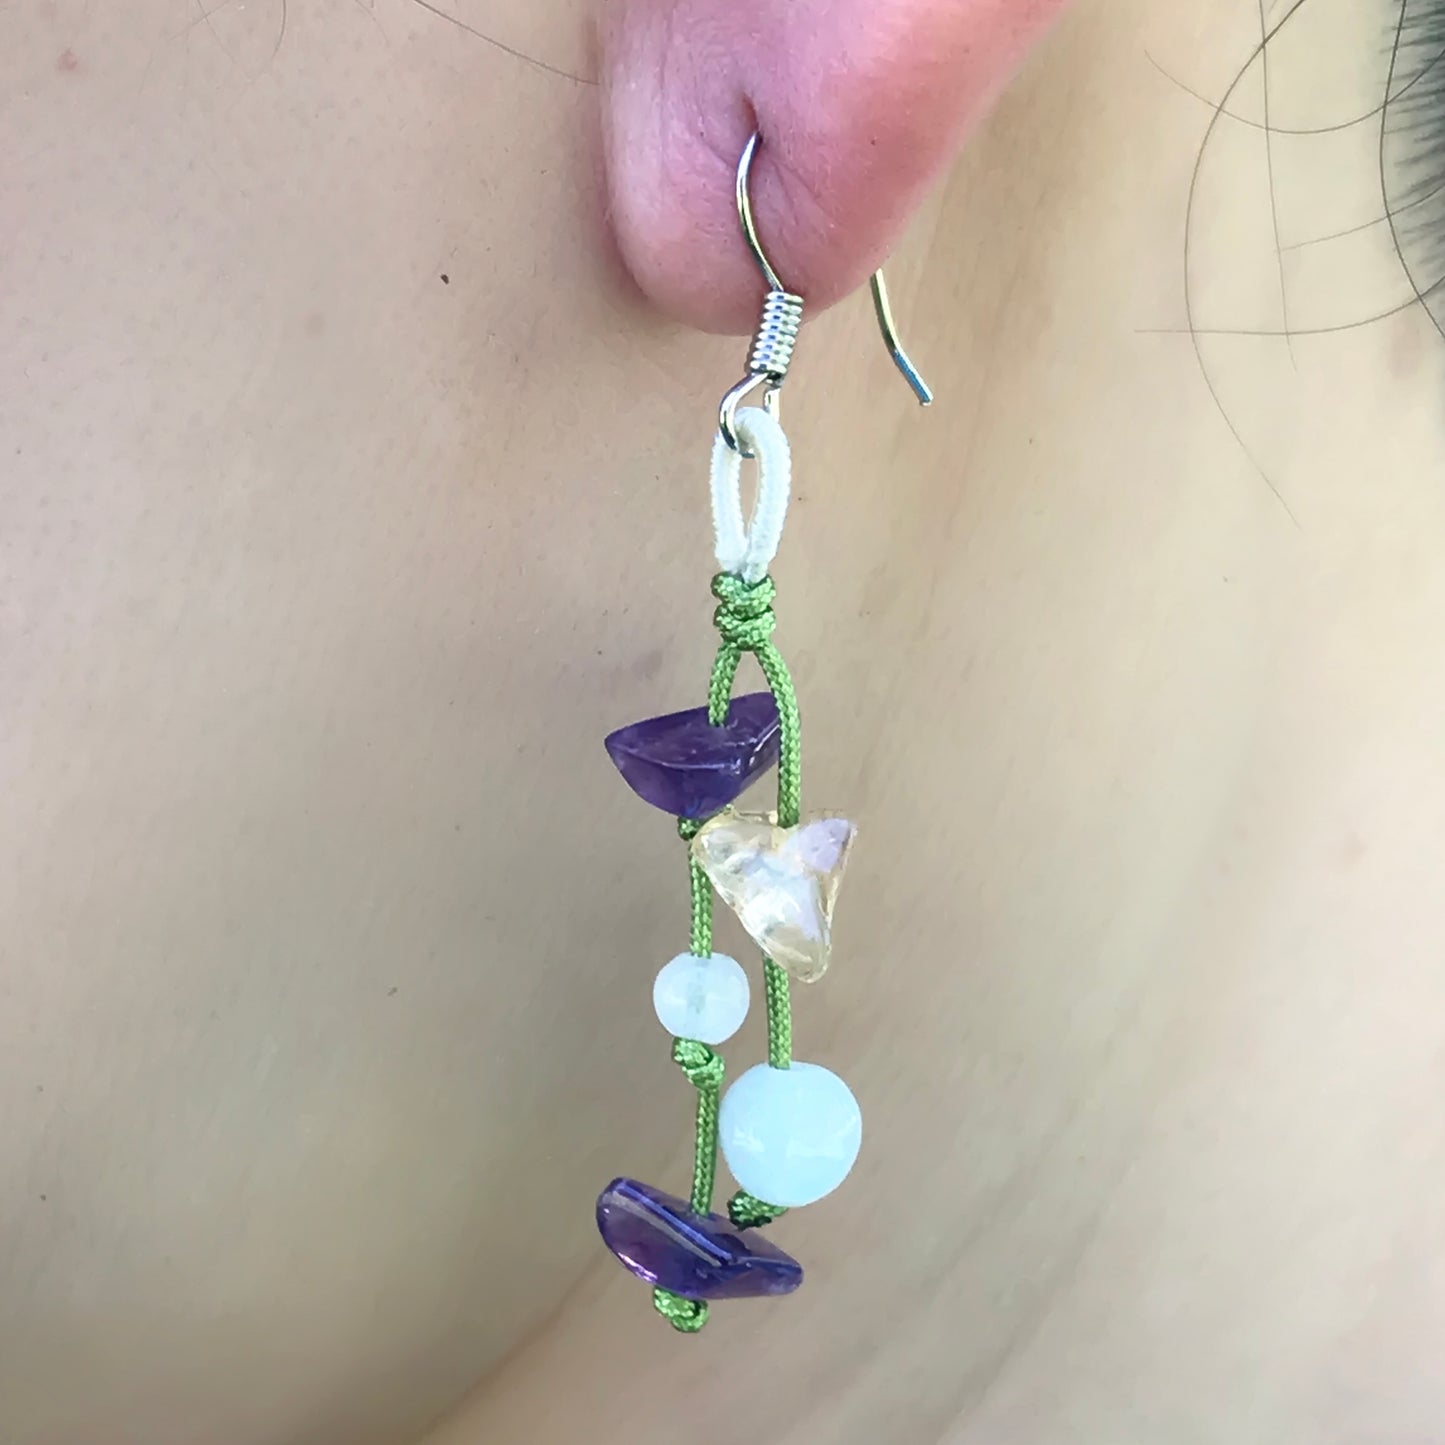 Shine Bright with Amethyst, Citrine and Jade Earrings